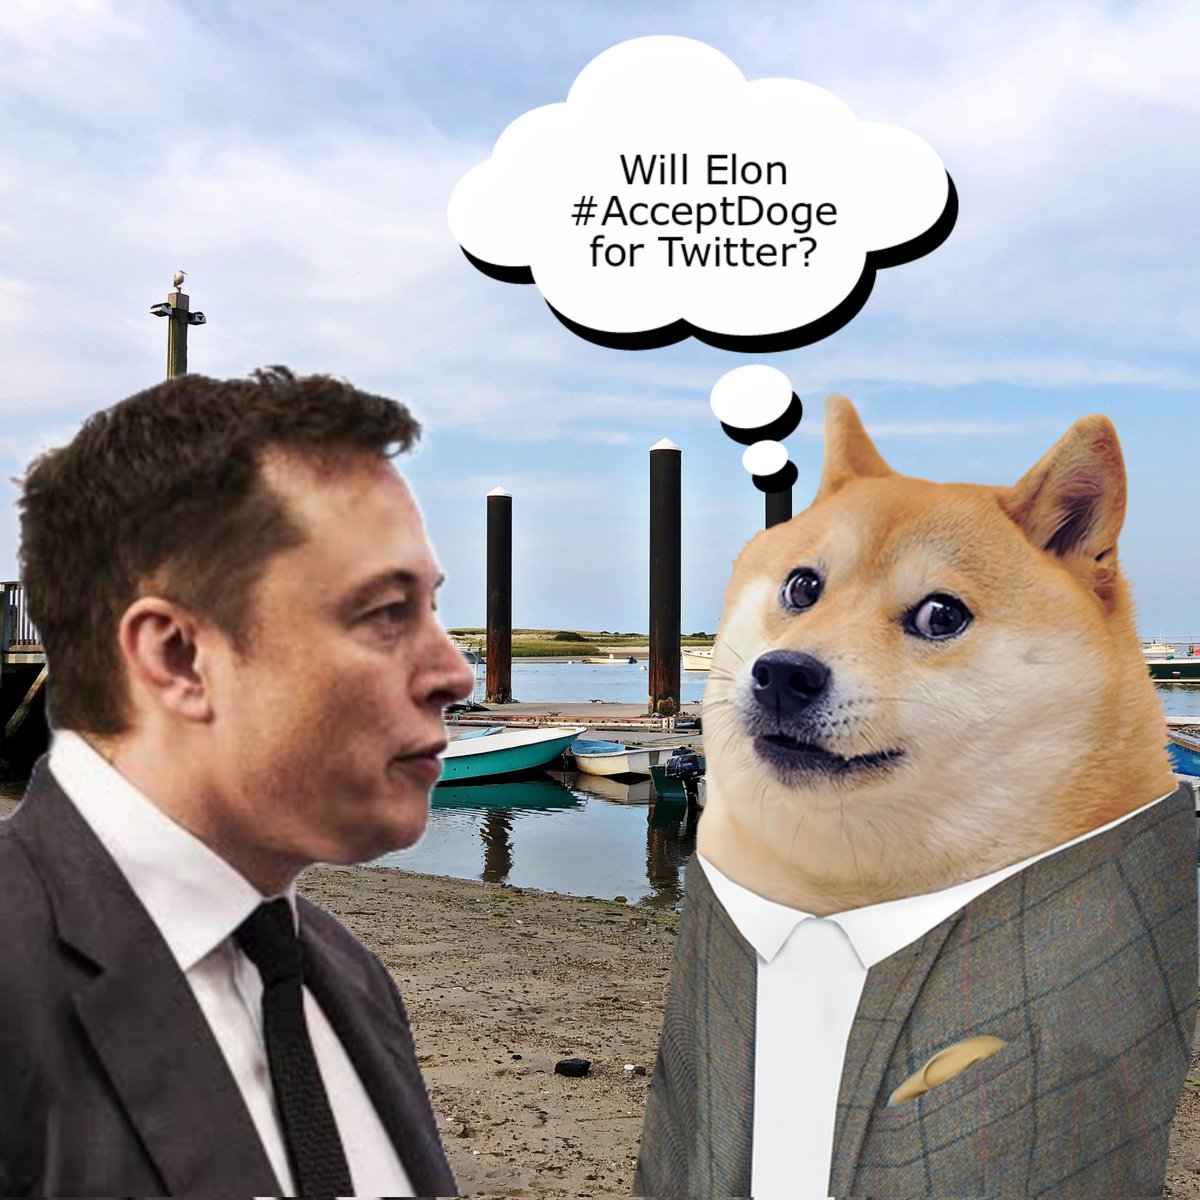 Will @elonmusk #AcceptDoge for @twitter? 🤔
#doge #dogecoin